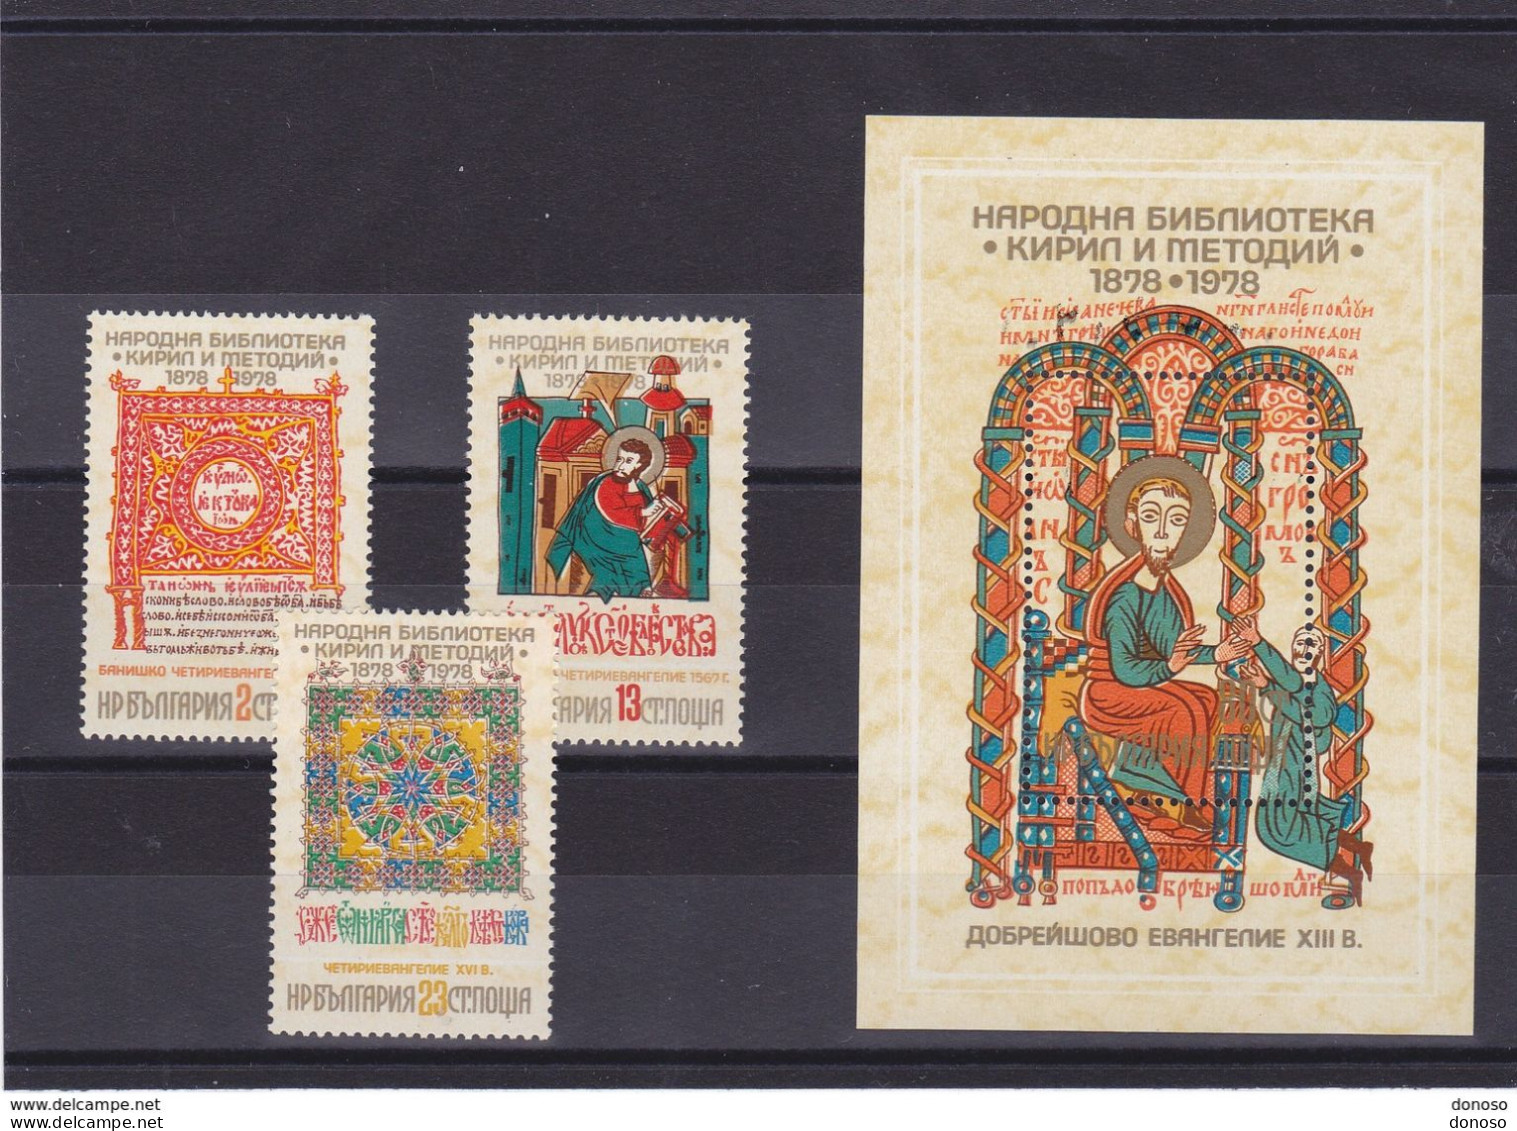 BULGARIE 1978 BIBLIOTHEQUE NATIONALE Yvert 2409-2411 + BF 77, Michel 2731-2733 + Bl 82 NEUF** MNH Cote 4,60 Euros - Unused Stamps